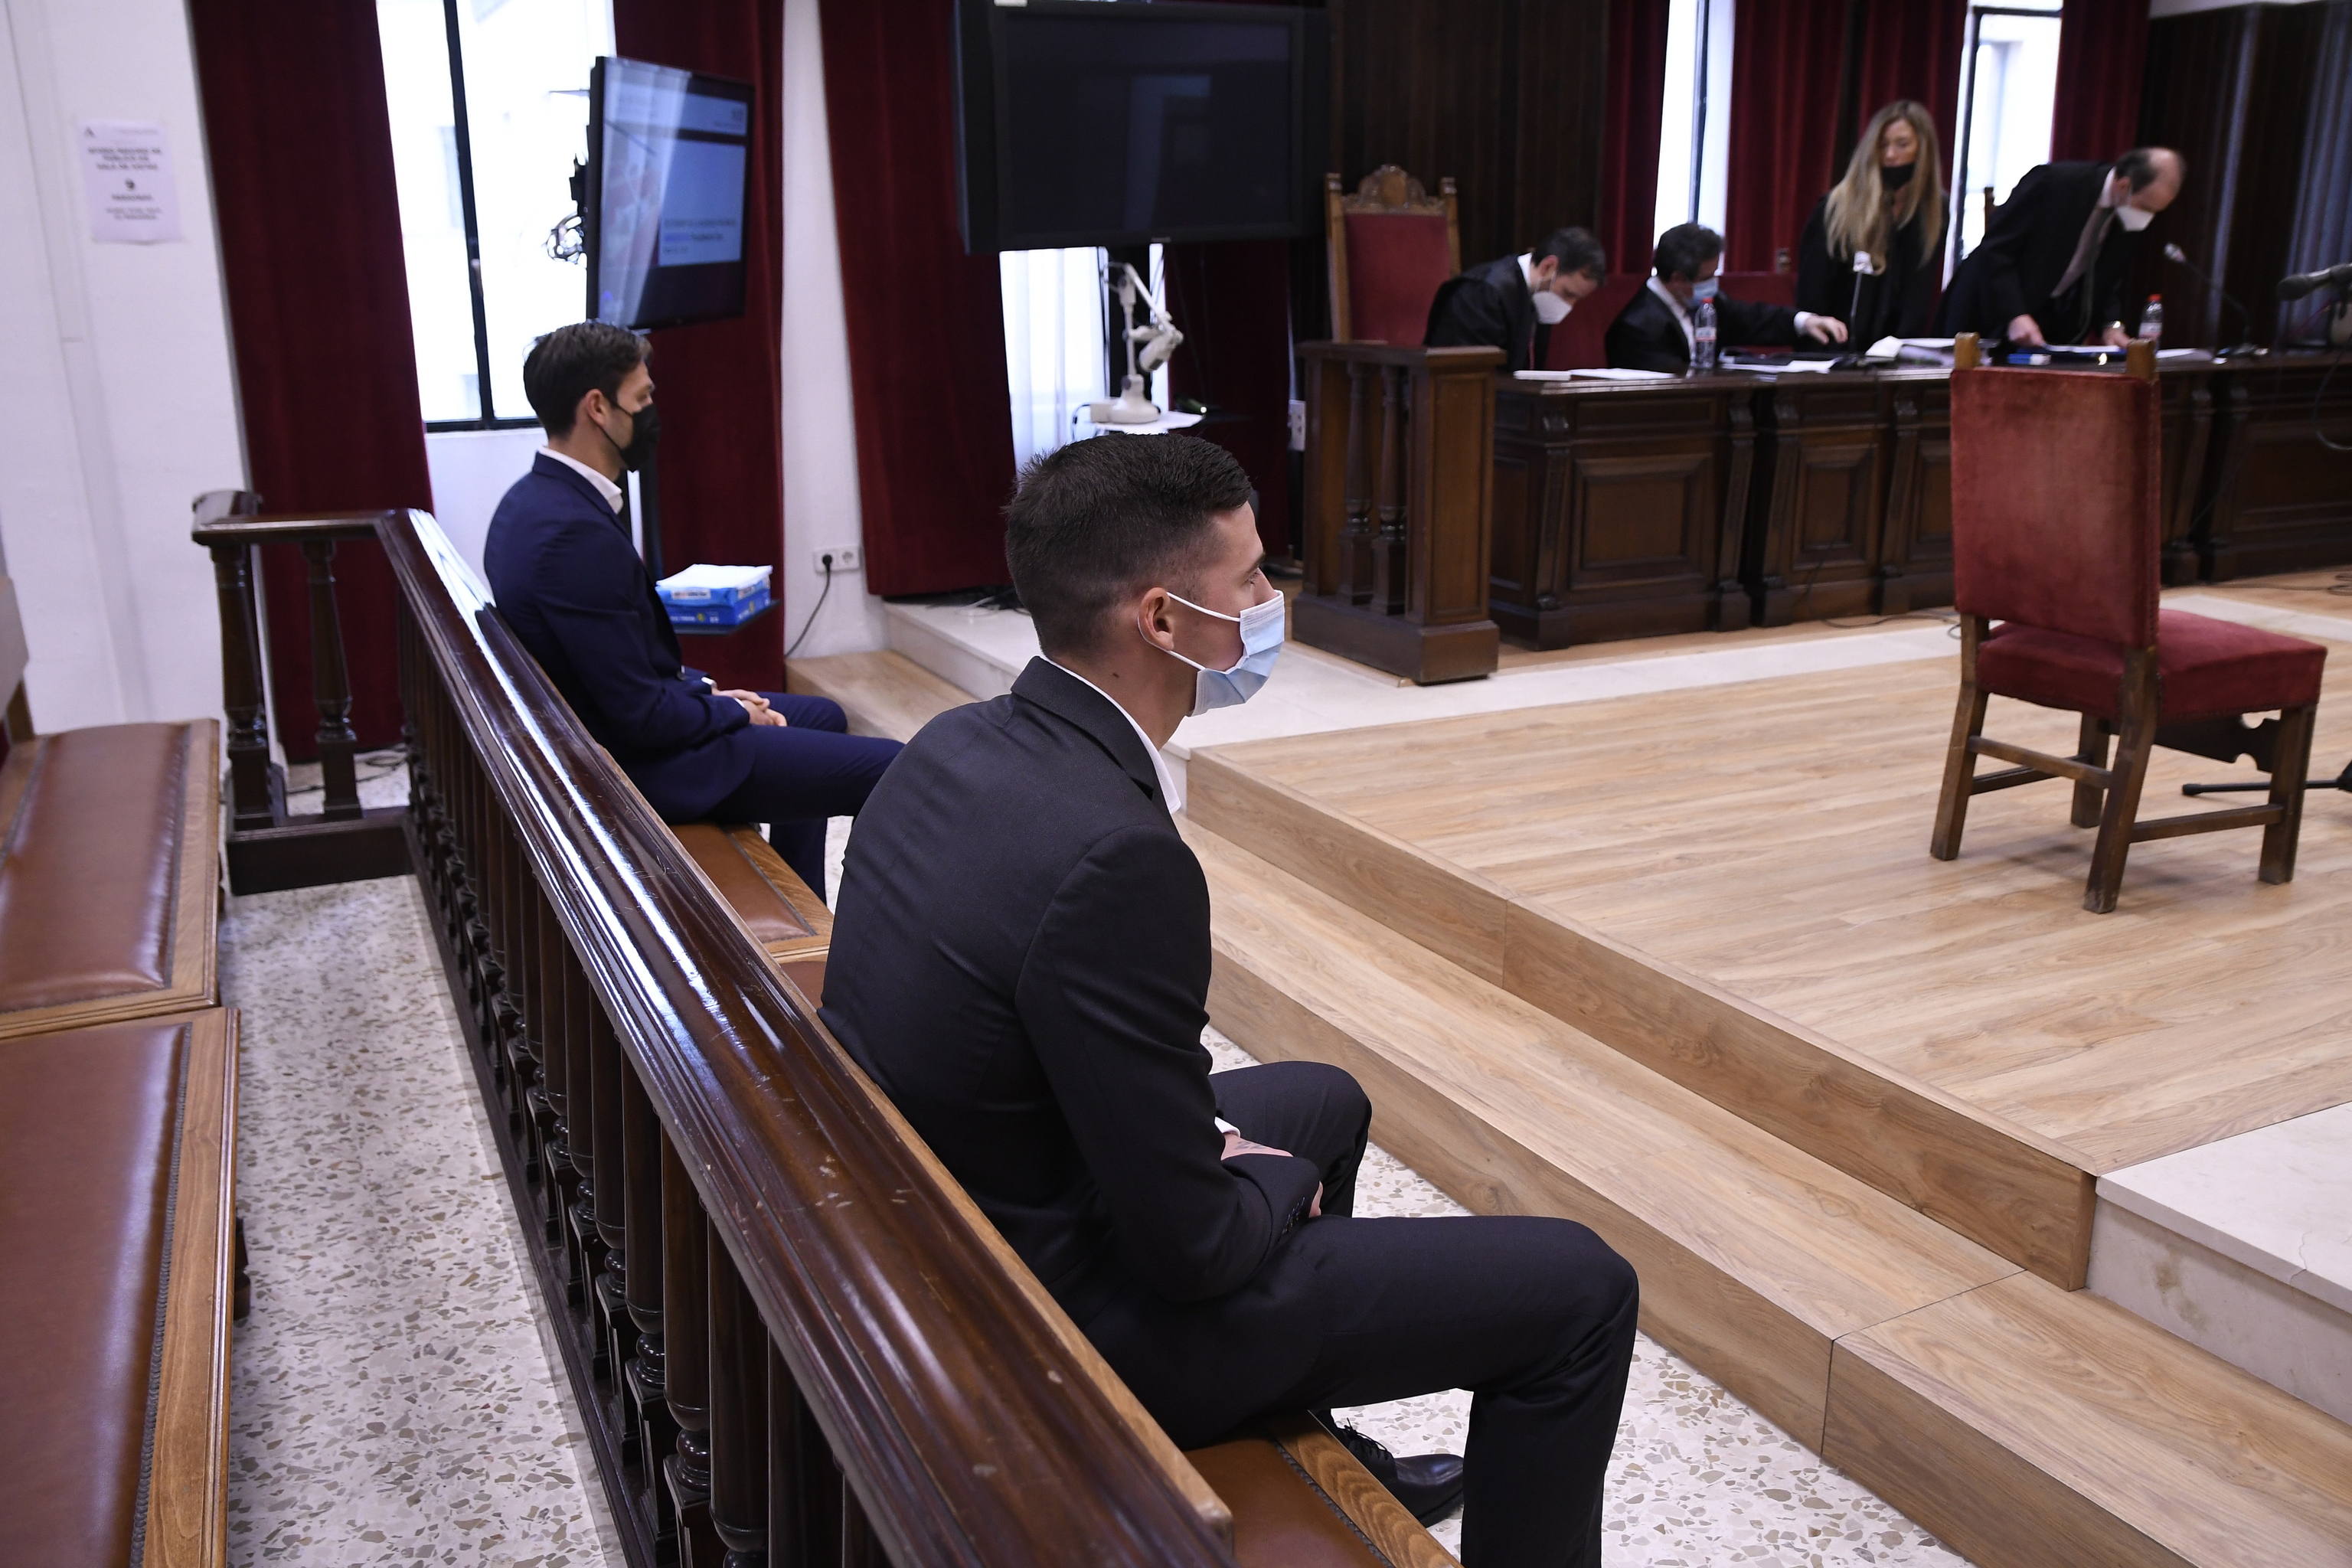 Shanti Meena on the bench of the Almeria Court during the trial.